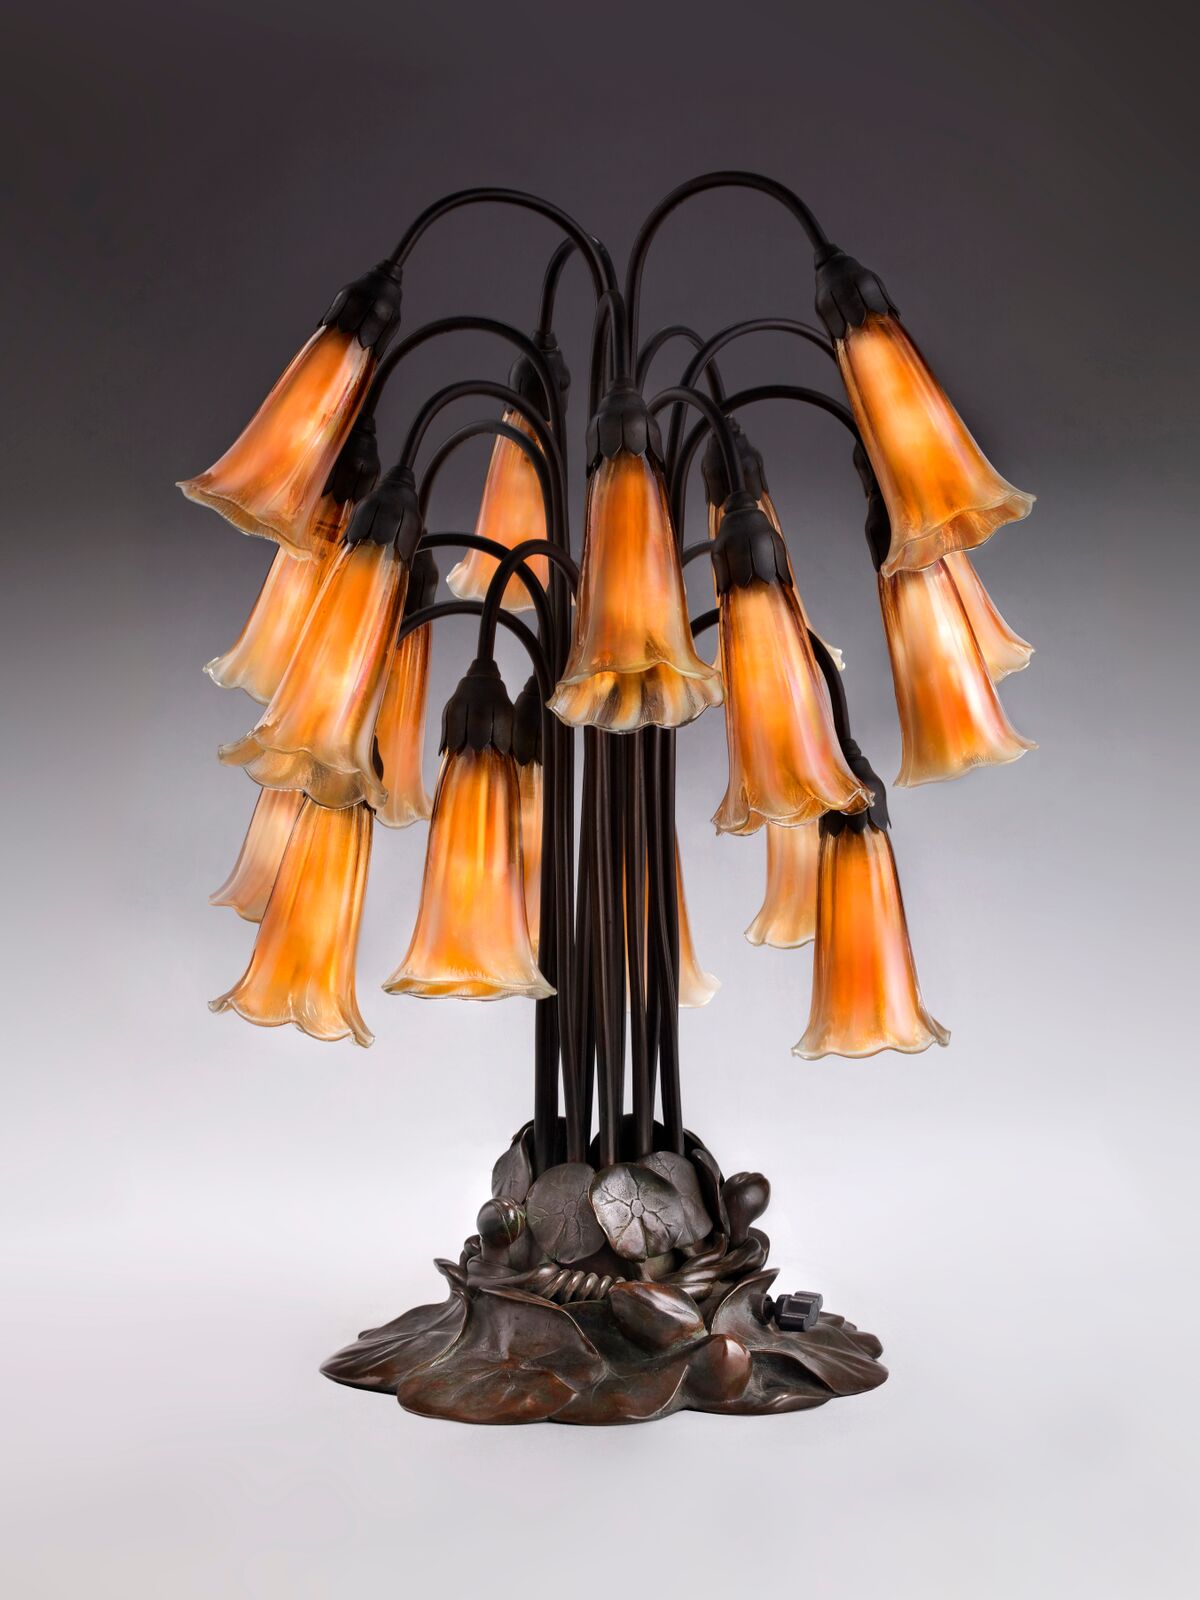 Tiffany Glass & Decorating Company, Eighteen-Light Lily Table Lamp , prior to 1902, bronze, blown glass. Photograph by John Faier. © 2013 Driehaus Museum